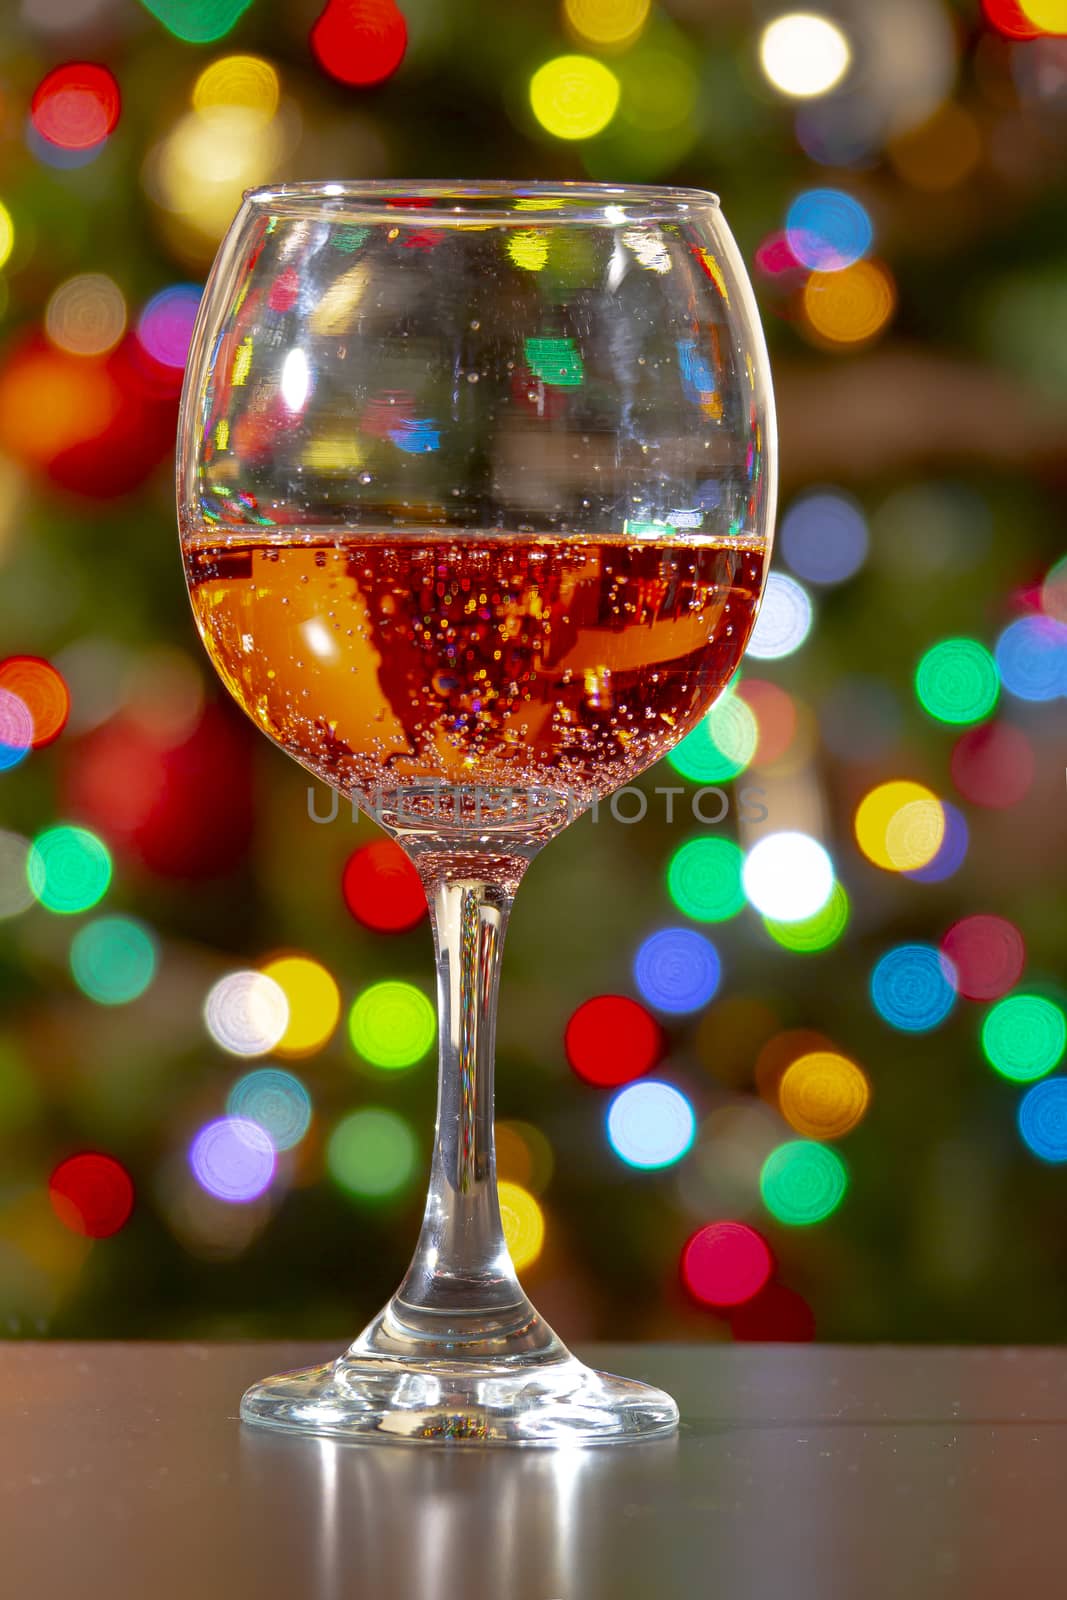 Sweet Fruity Sparkling Rose Wine with bubbles on a wine cup with colourful lights